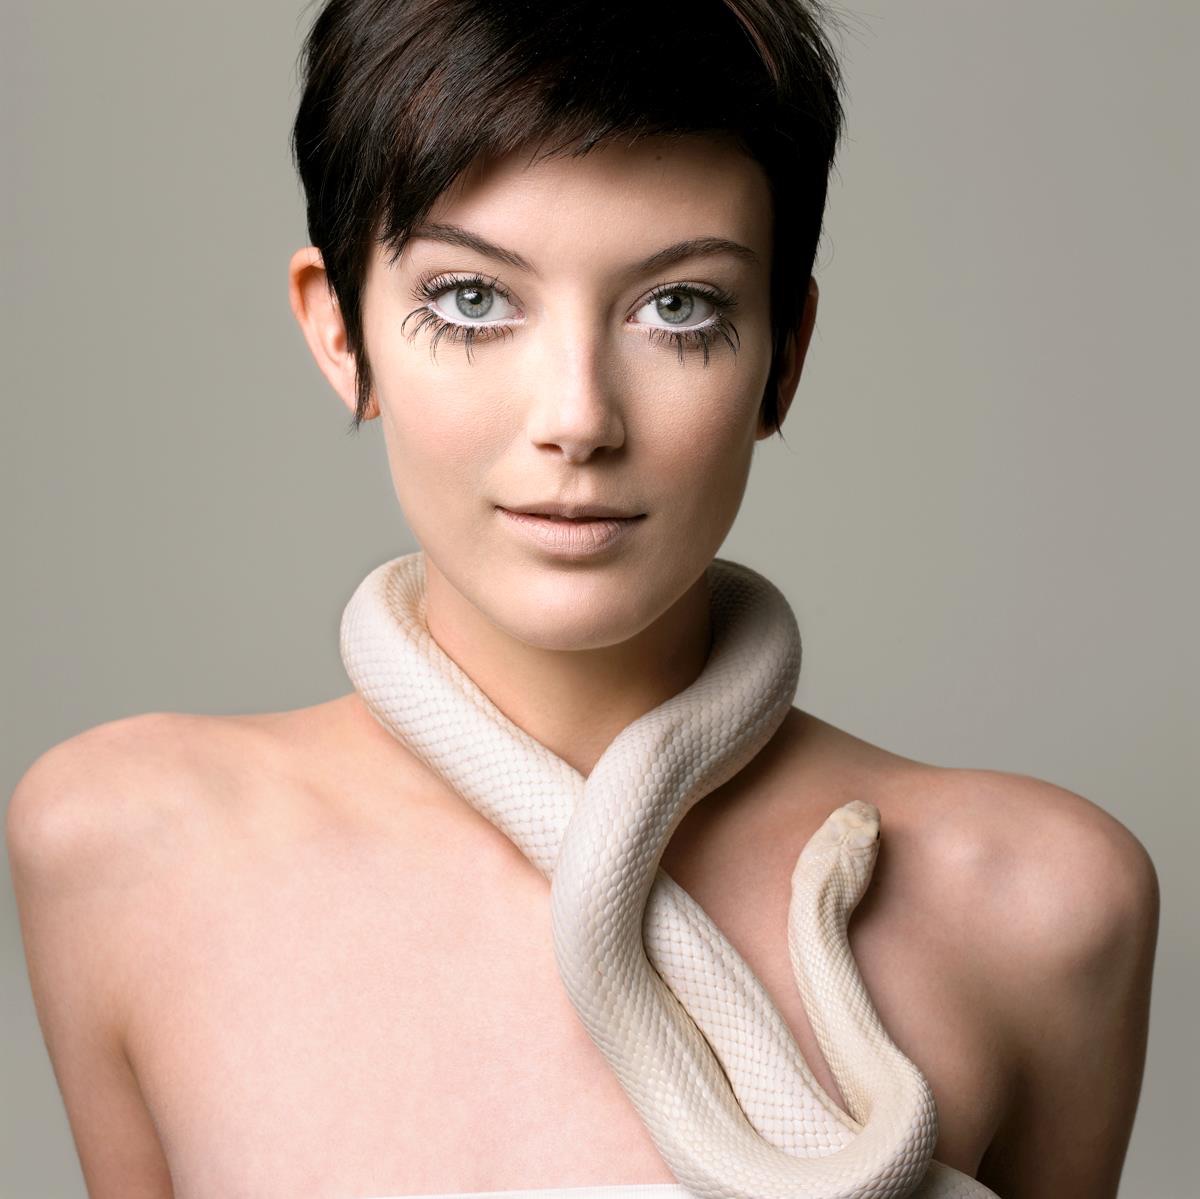 ANTM 1 3rd Episode : Beauty Shots with Snakes Photo - MforModels